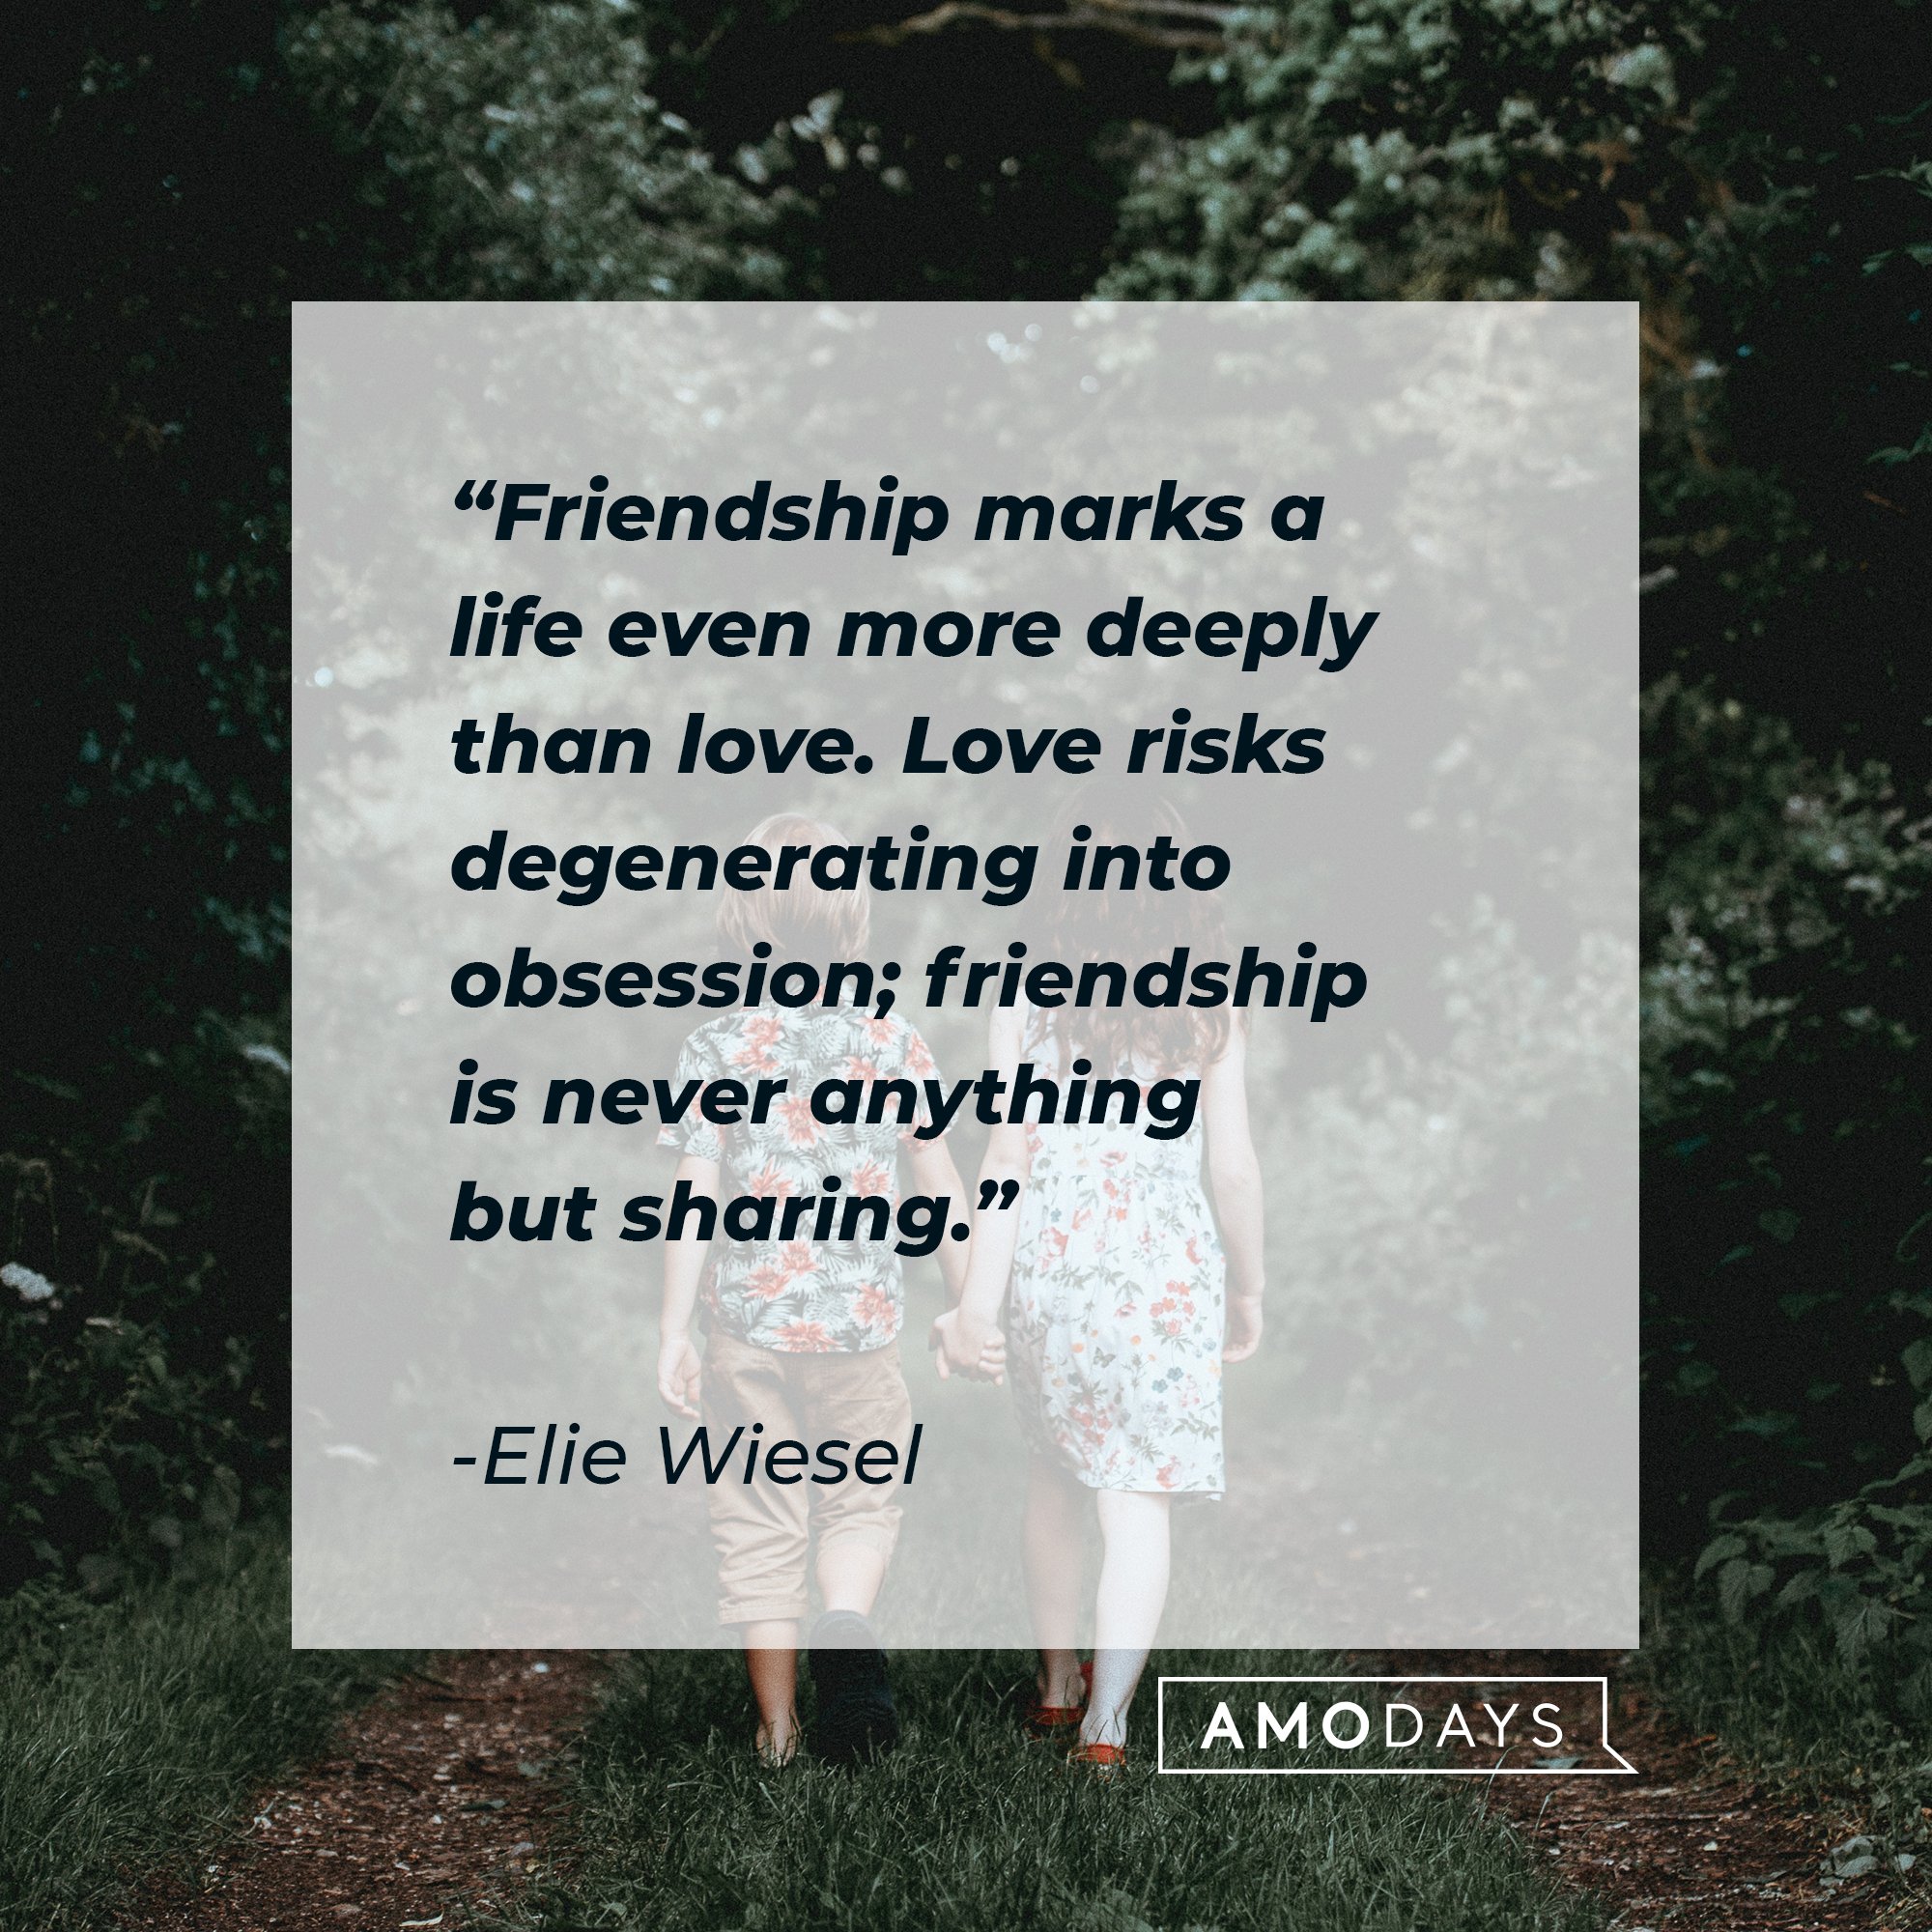 Elie Wiesel’s “Friendship marks a life even more deeply than love. Love risks degenerating into obsession; friendship is never anything but sharing.”  | Image: AmoDays